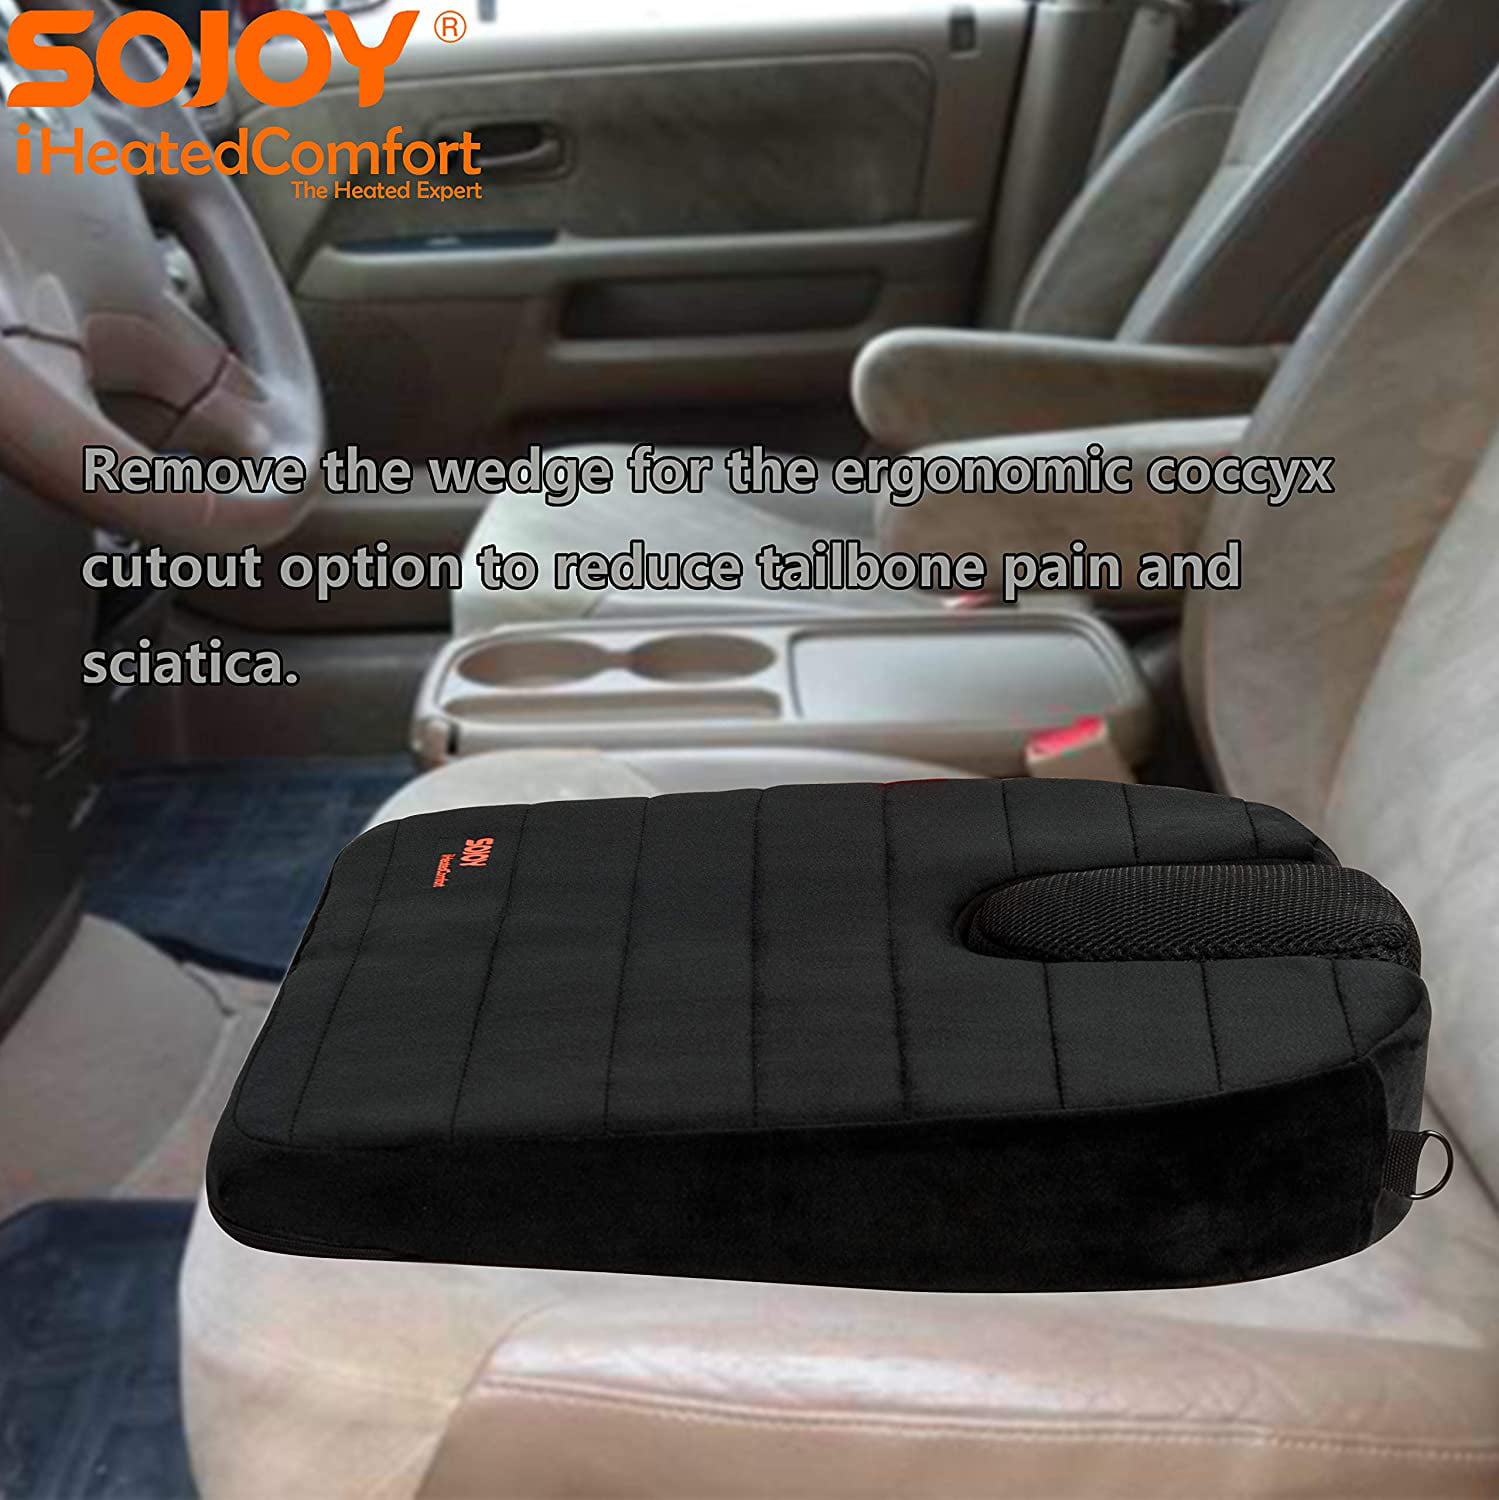 Relief Expert Seat Warmer Universal Fit Heated Seat Cover with Smart Safety Protection